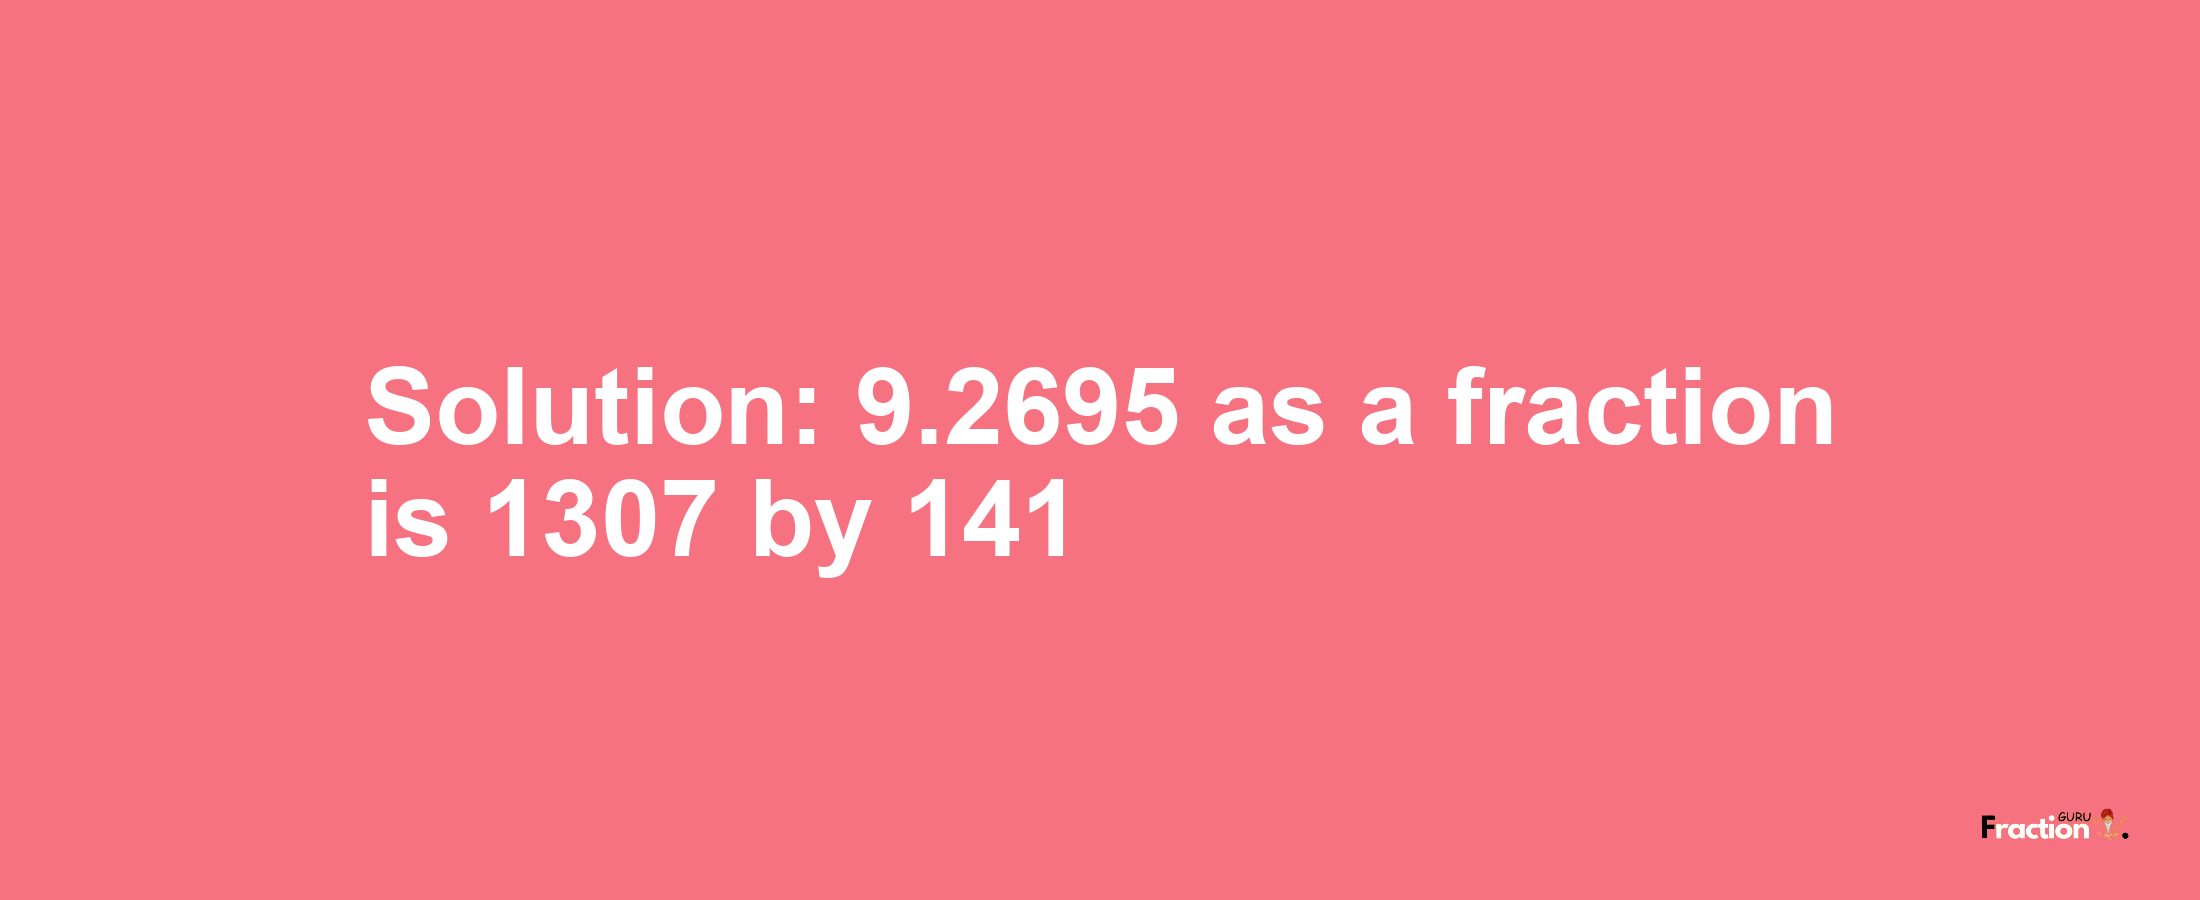 Solution:9.2695 as a fraction is 1307/141